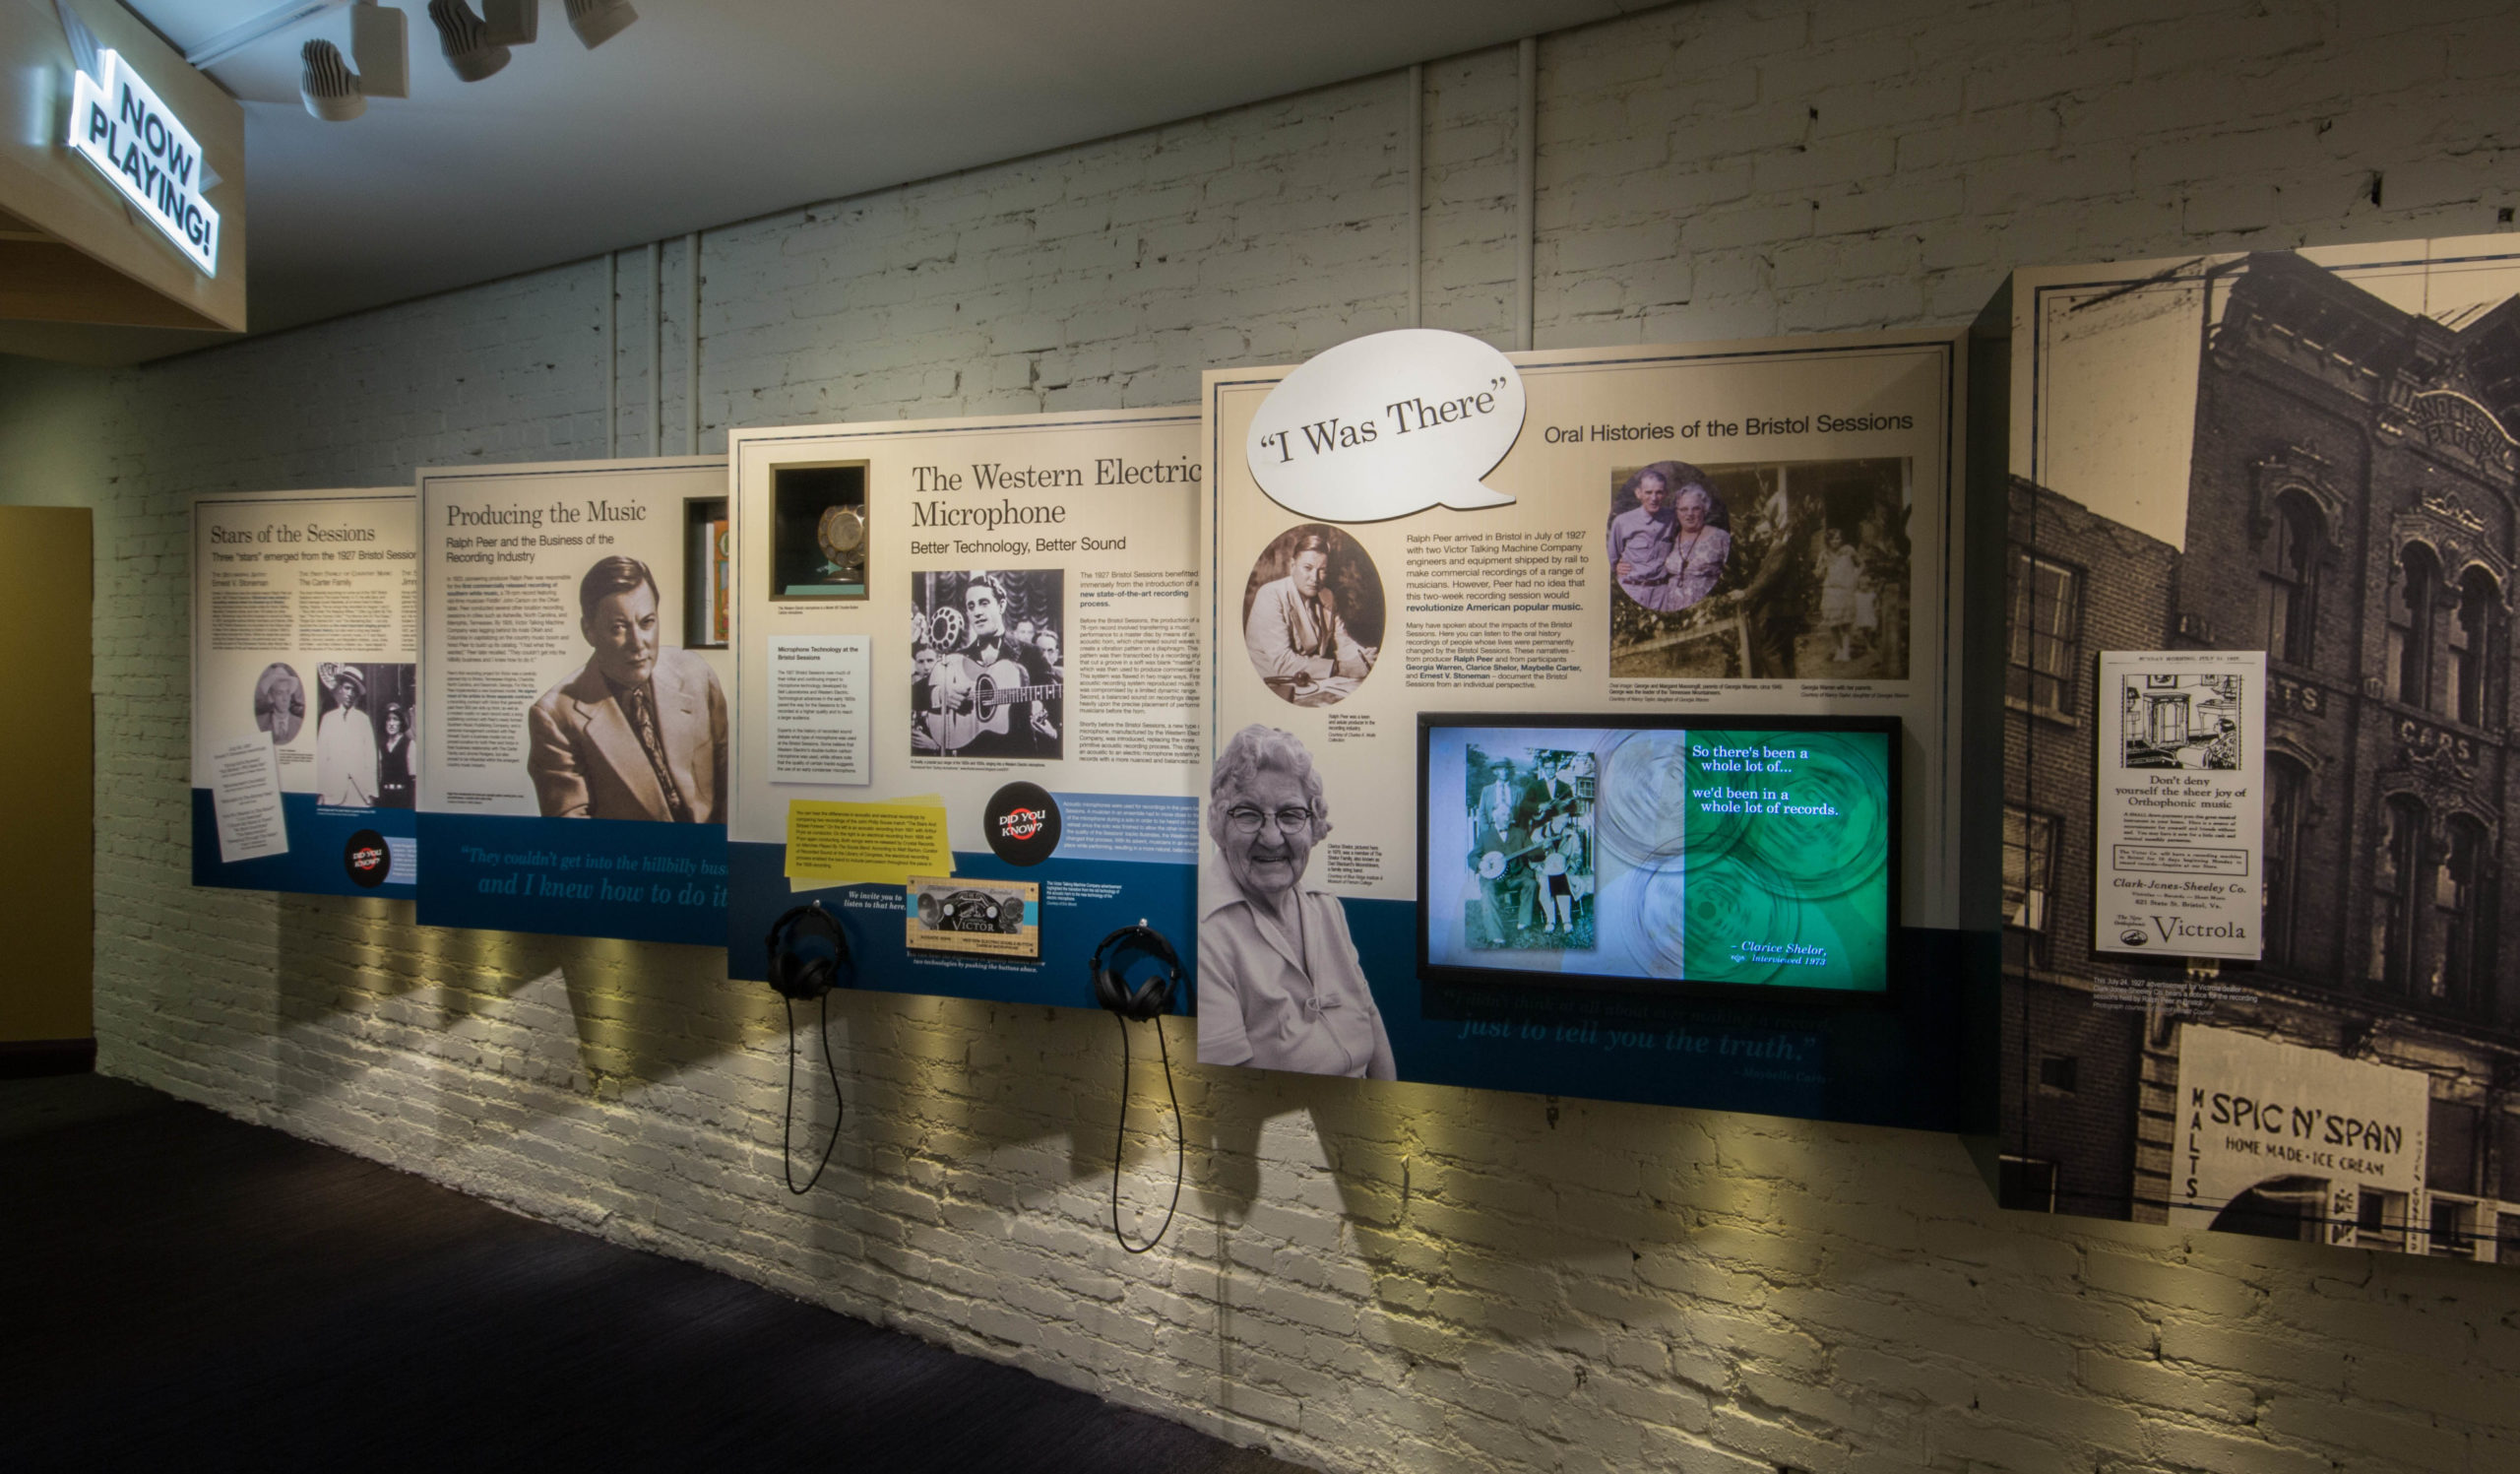 A view of the five sawtooth panels in the museum, each focusing on a different element of the 1927 Bristol Sessions. From left to right, we see "Stars of the Sessions," "Producing the Music" (Ralph Peer), "The Western Electric Microphone," "I Was There," and the brief history of the Sessions in Bristol.